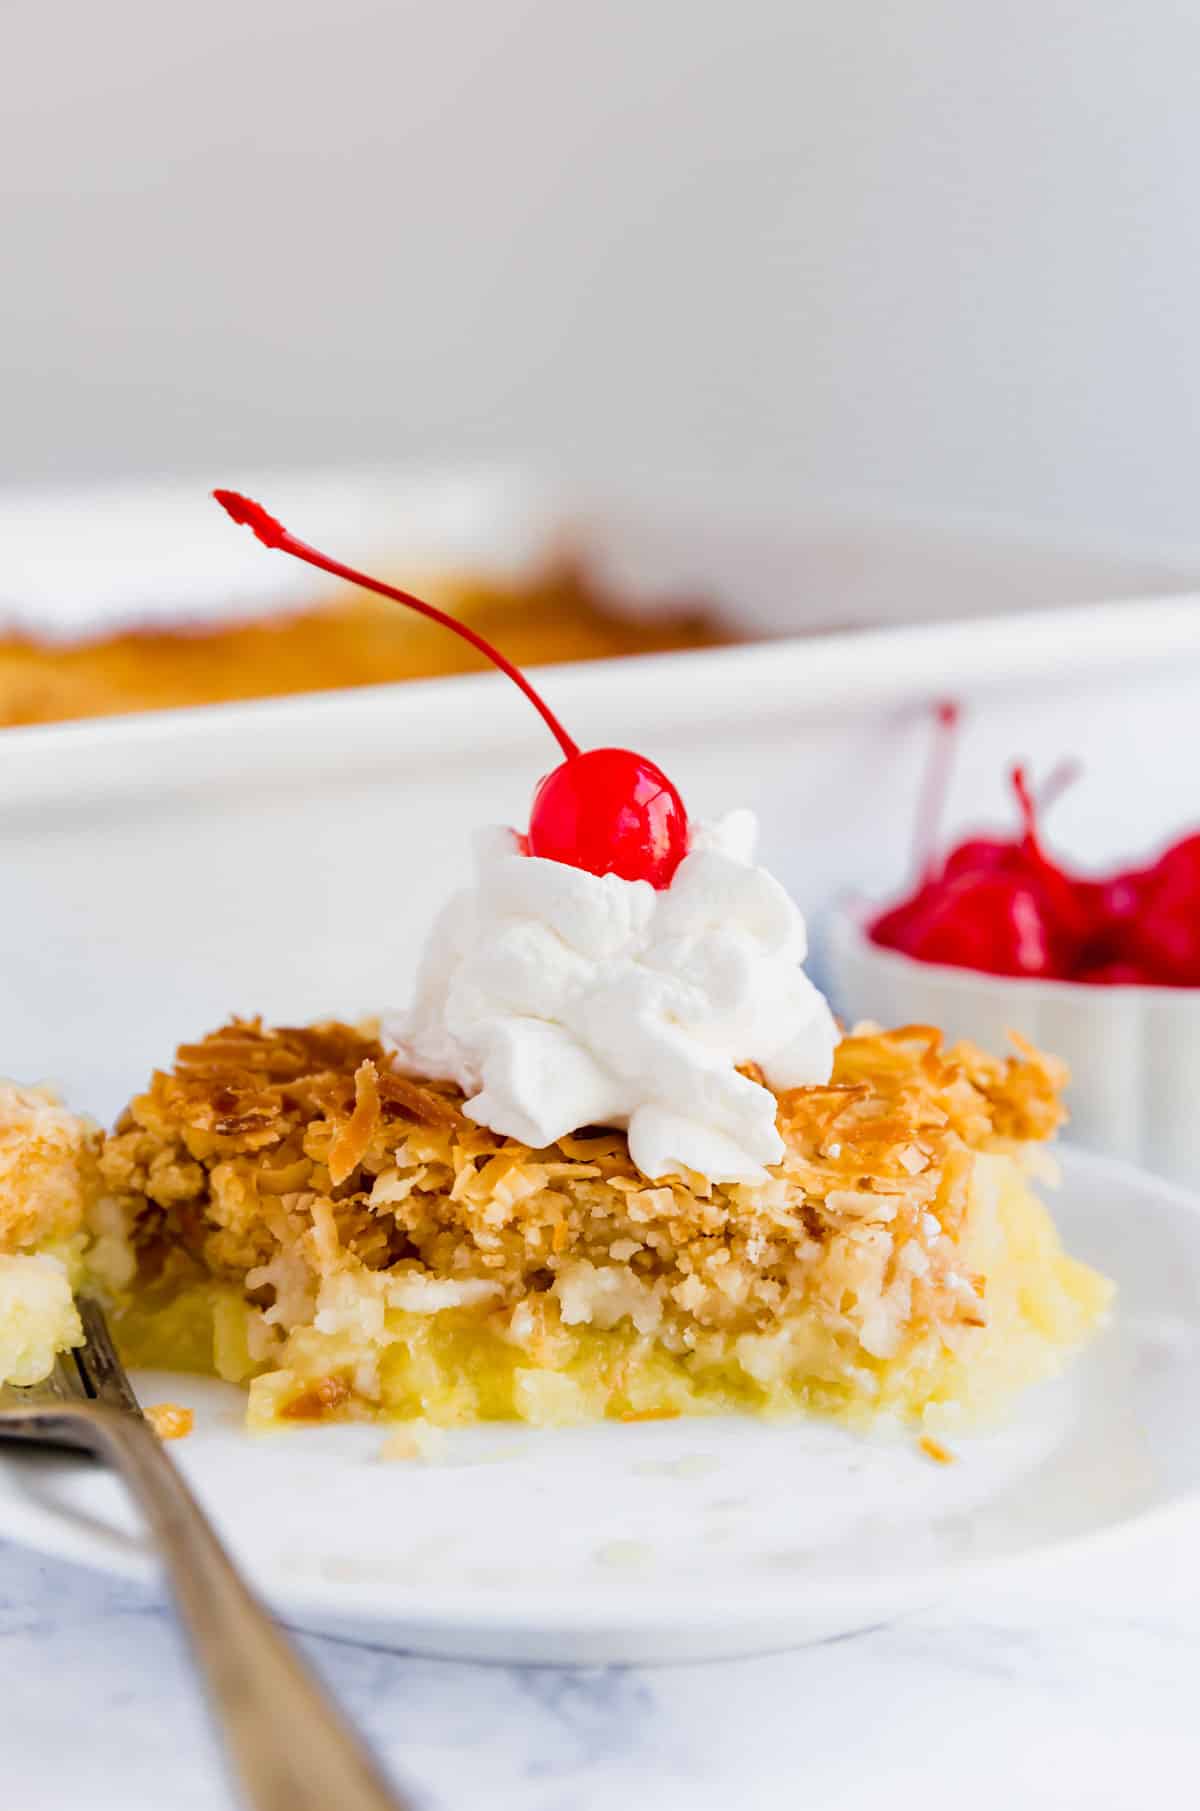 A close up image of Piña Colada dump cake on a plate with whipped cram and a cherry on top on a white plate with a fork.